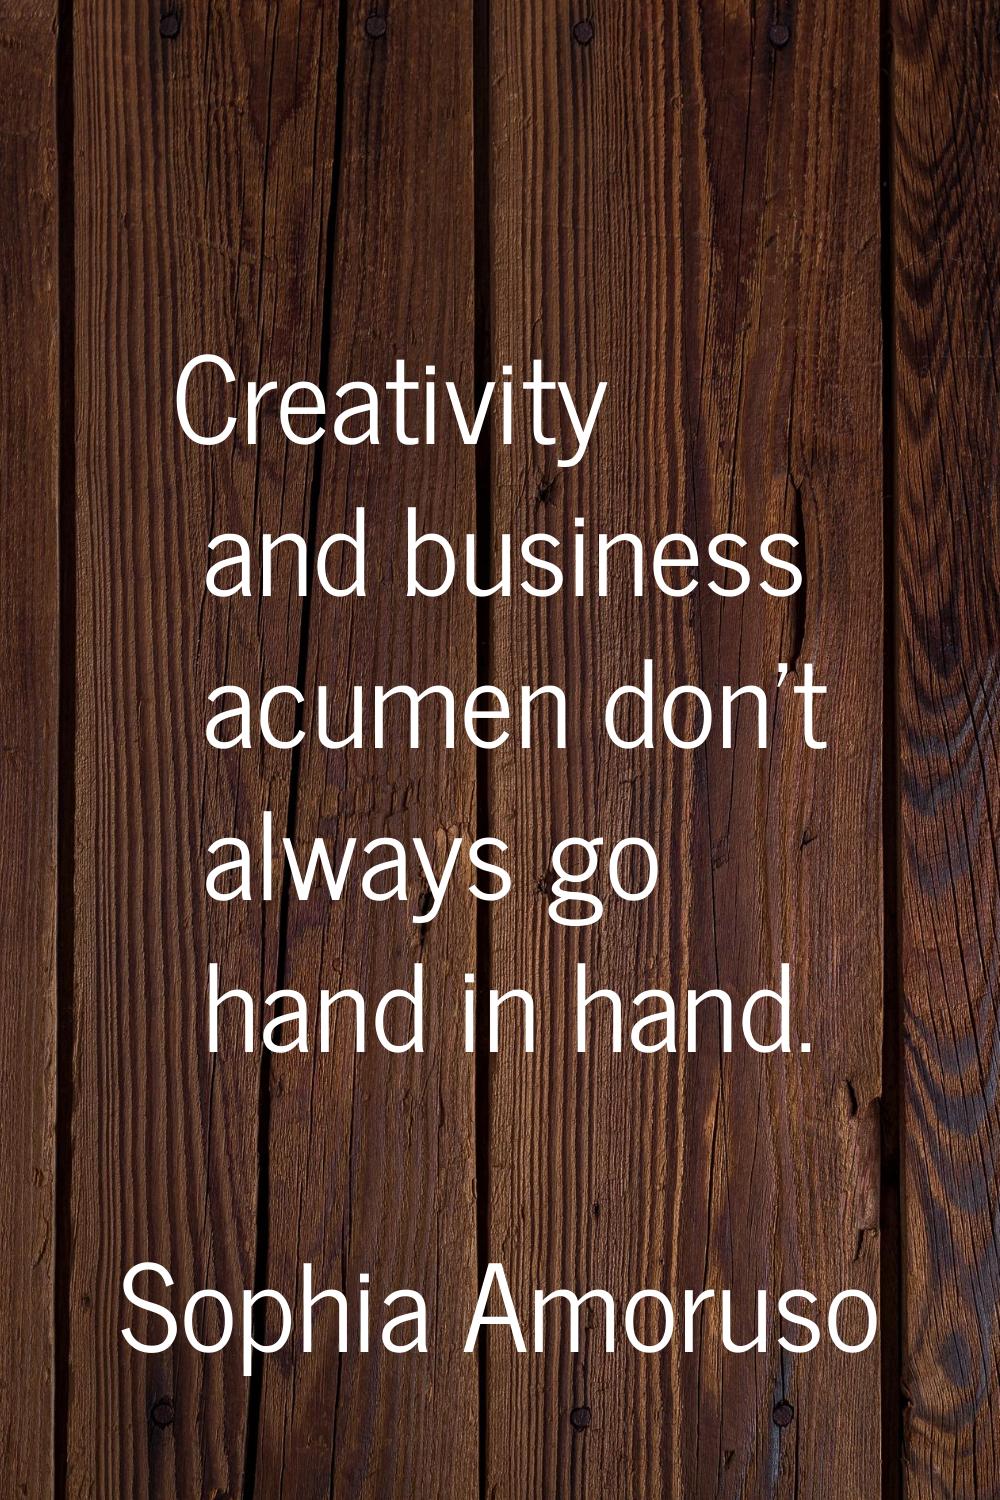 Creativity and business acumen don't always go hand in hand.